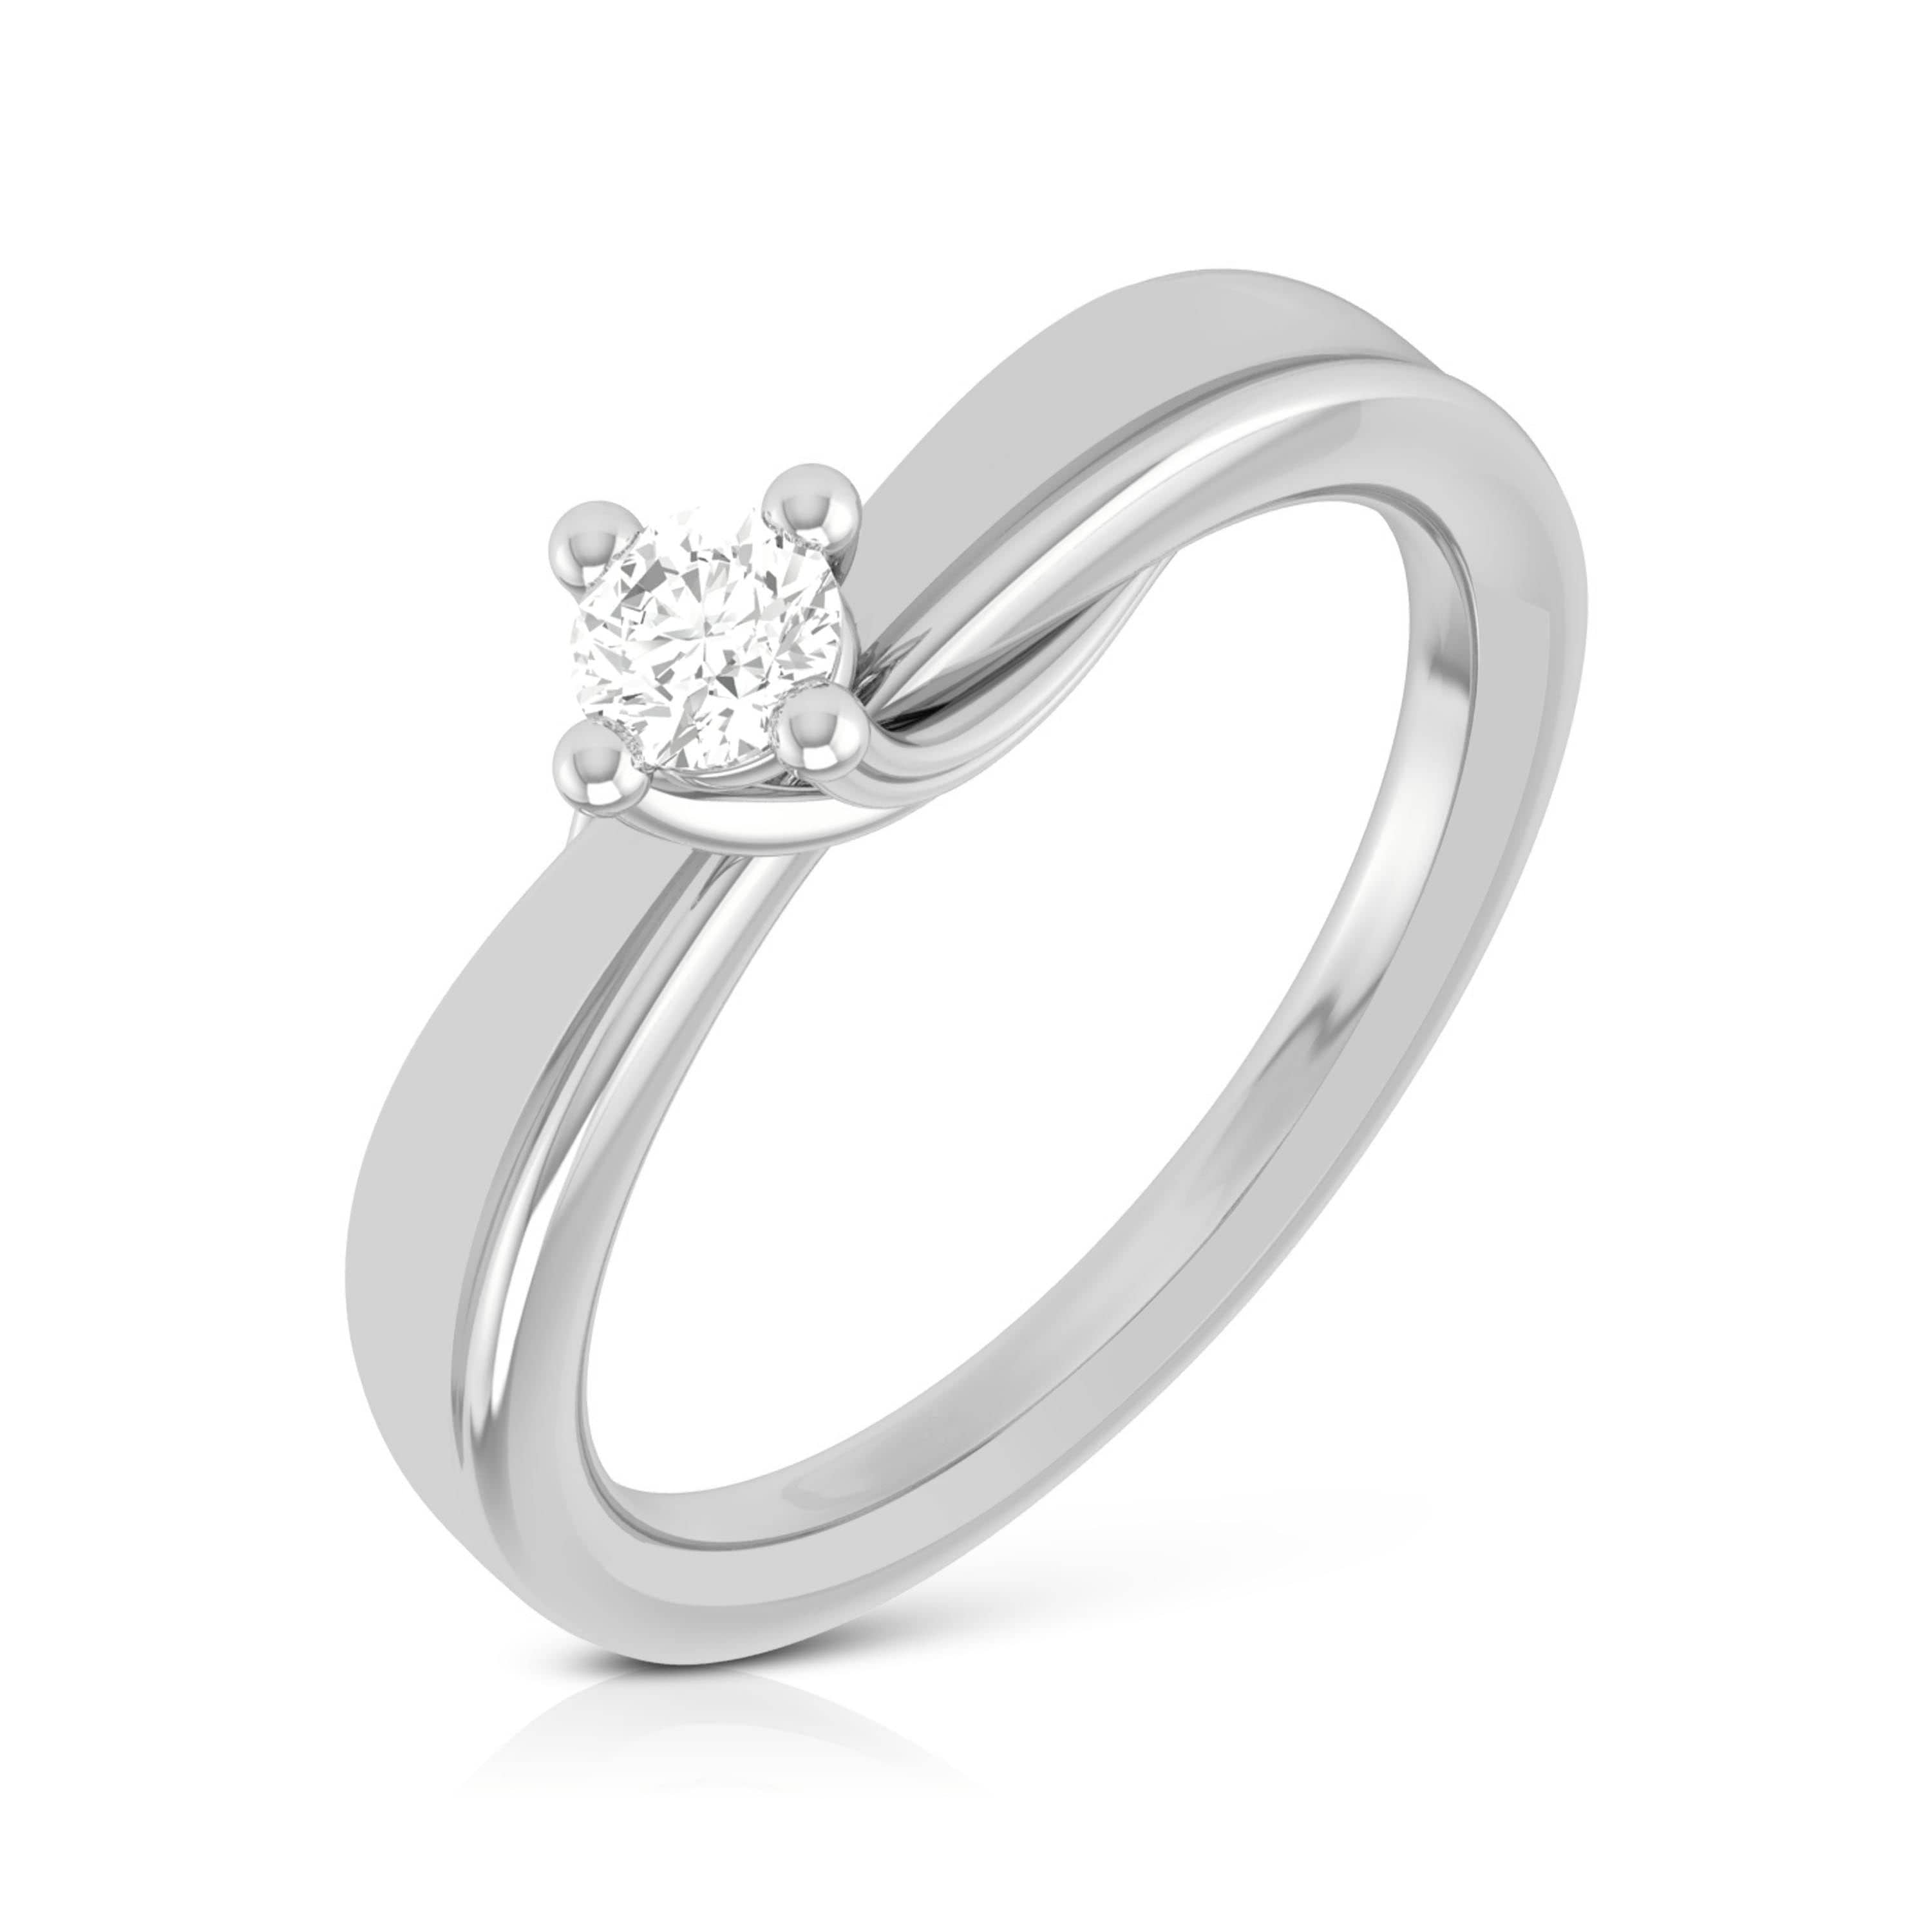 Buy Magical Classic Diamond Ring For Women Online | Perrian